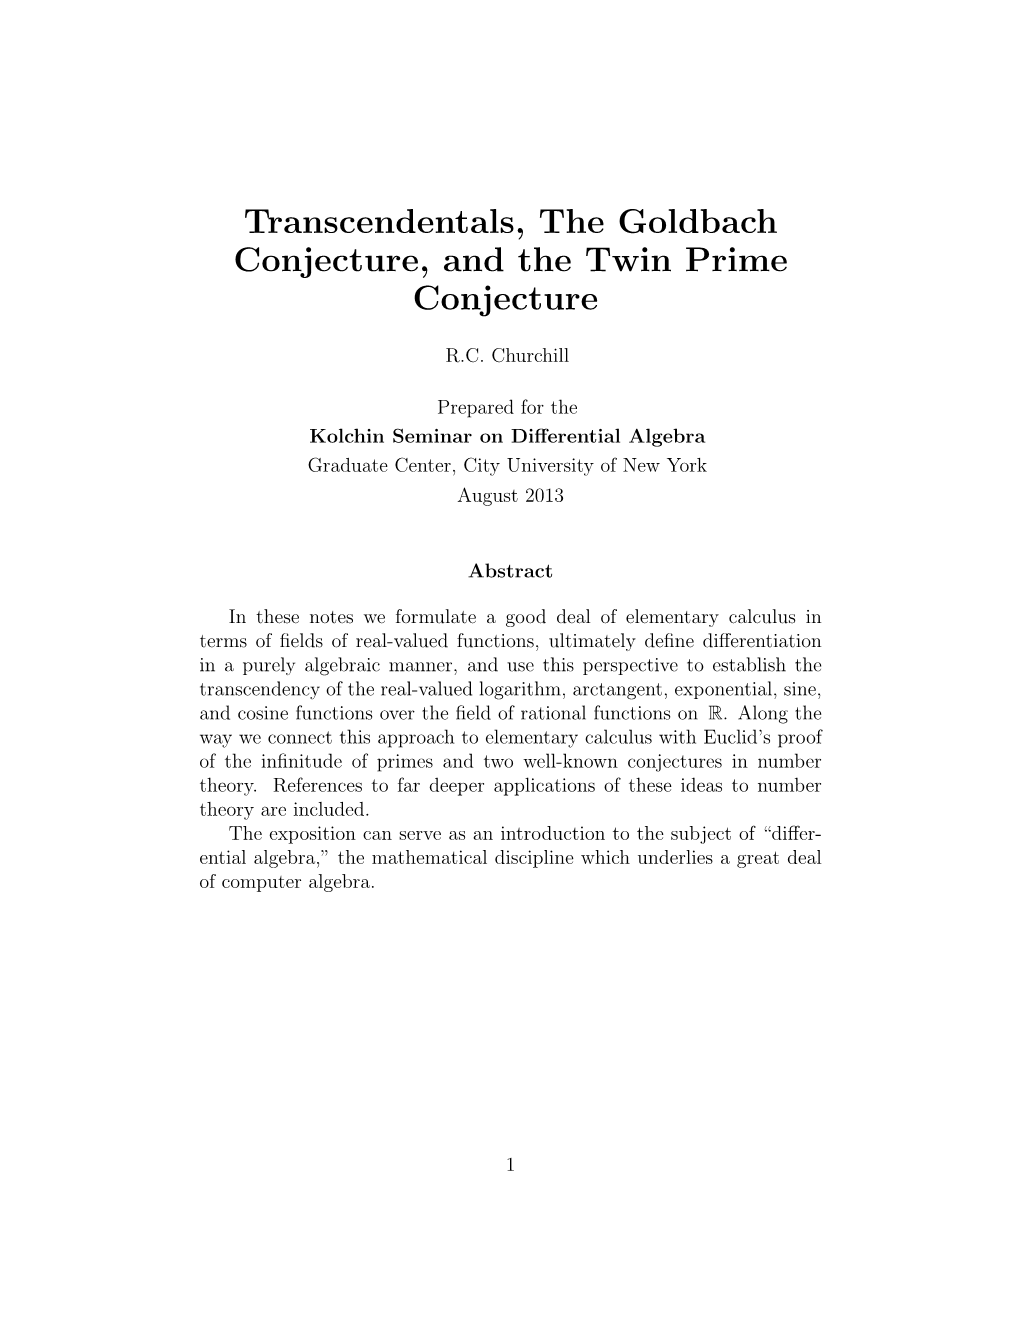 Transcendentals, the Goldbach Conjecture, and the Twin Prime Conjecture